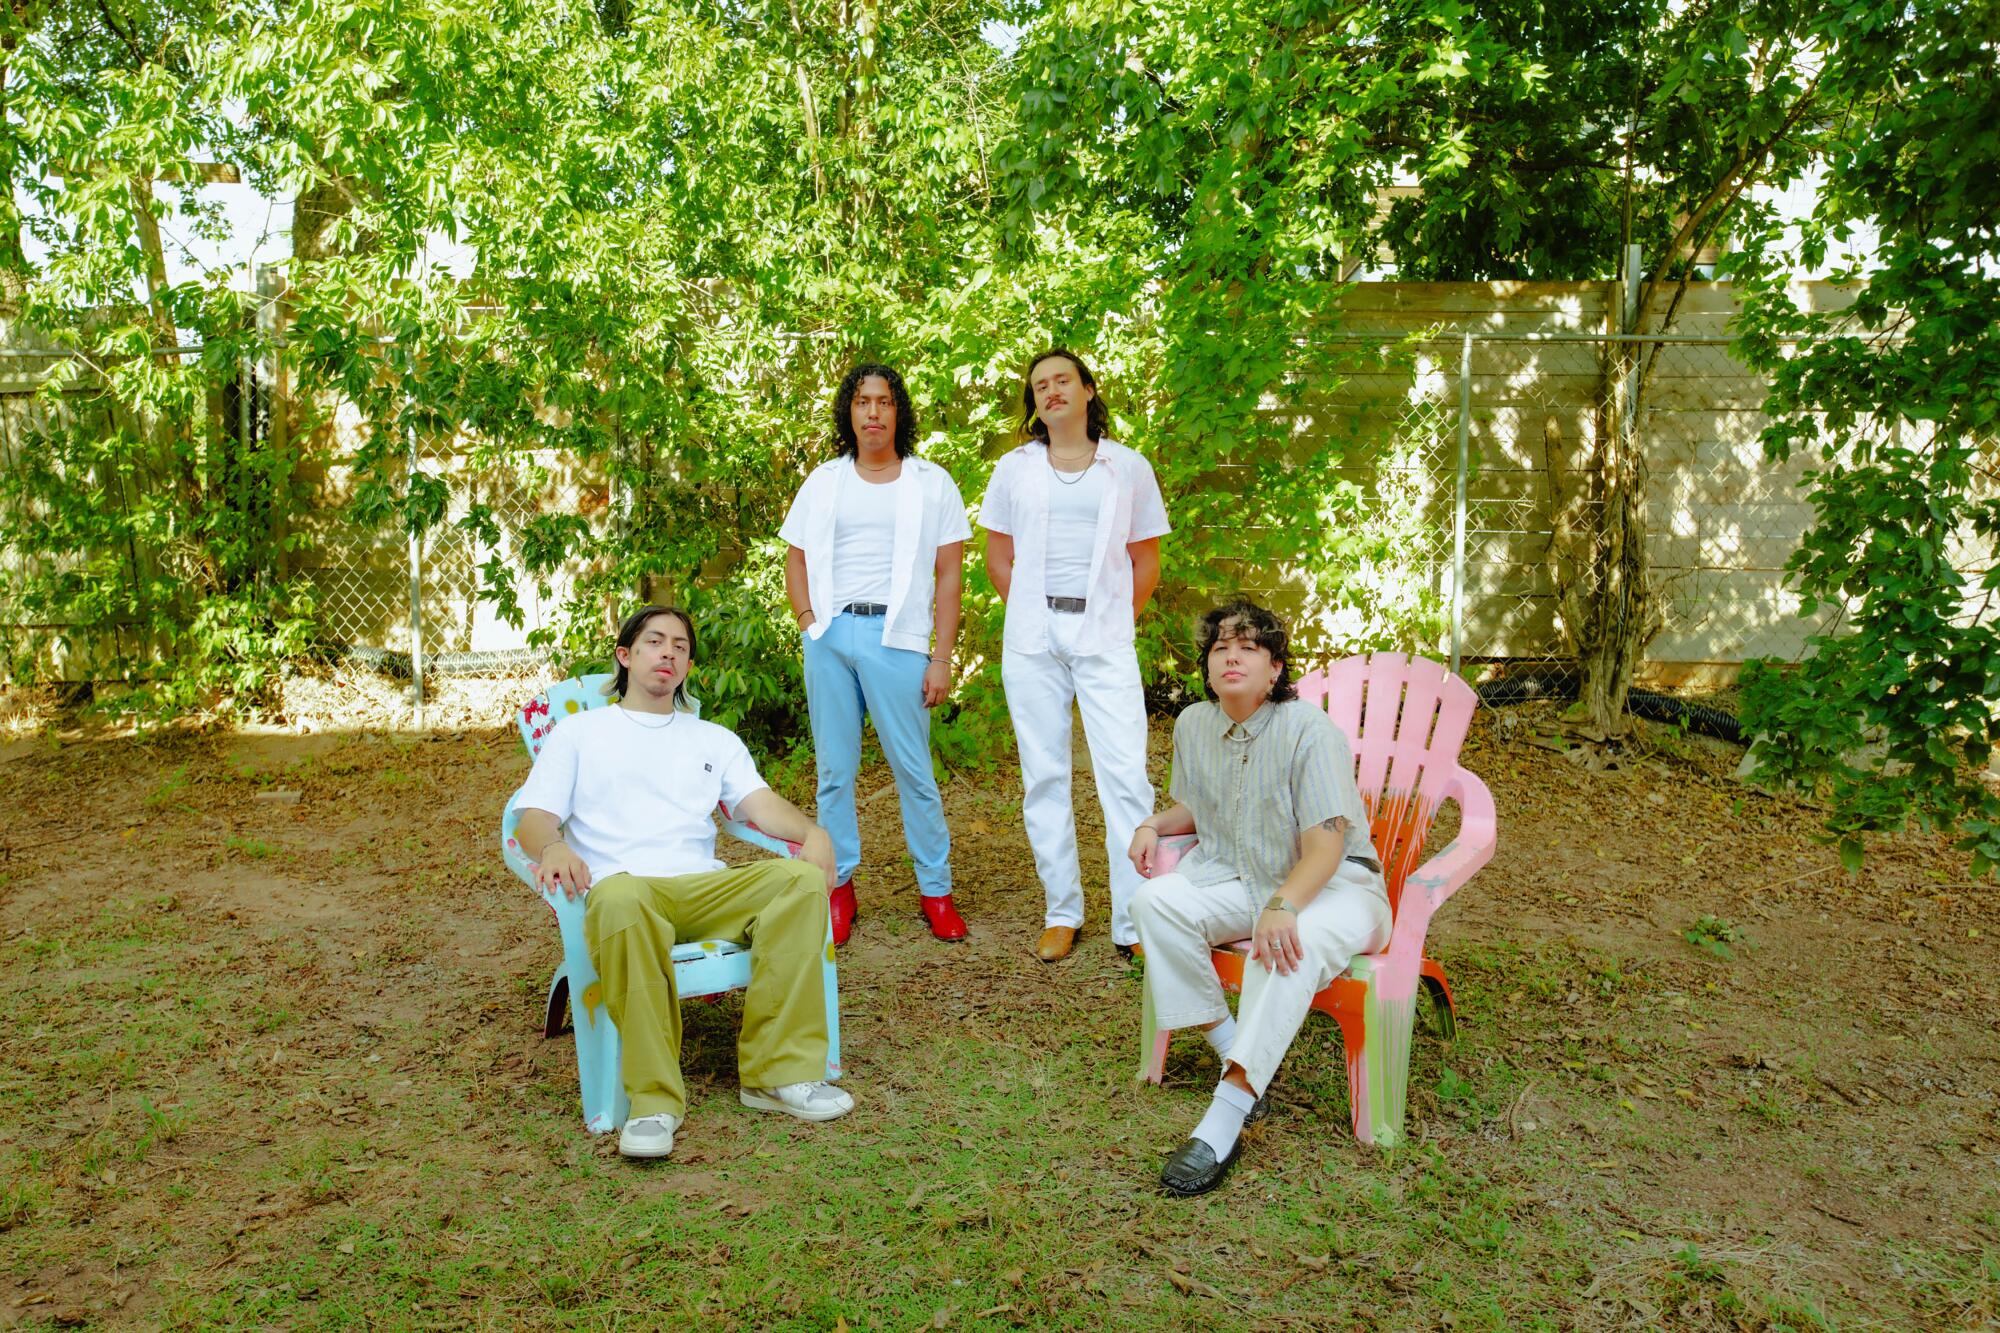 Members of Luna Luna are shown sitting and standing in their backyard in Austin, Texas.